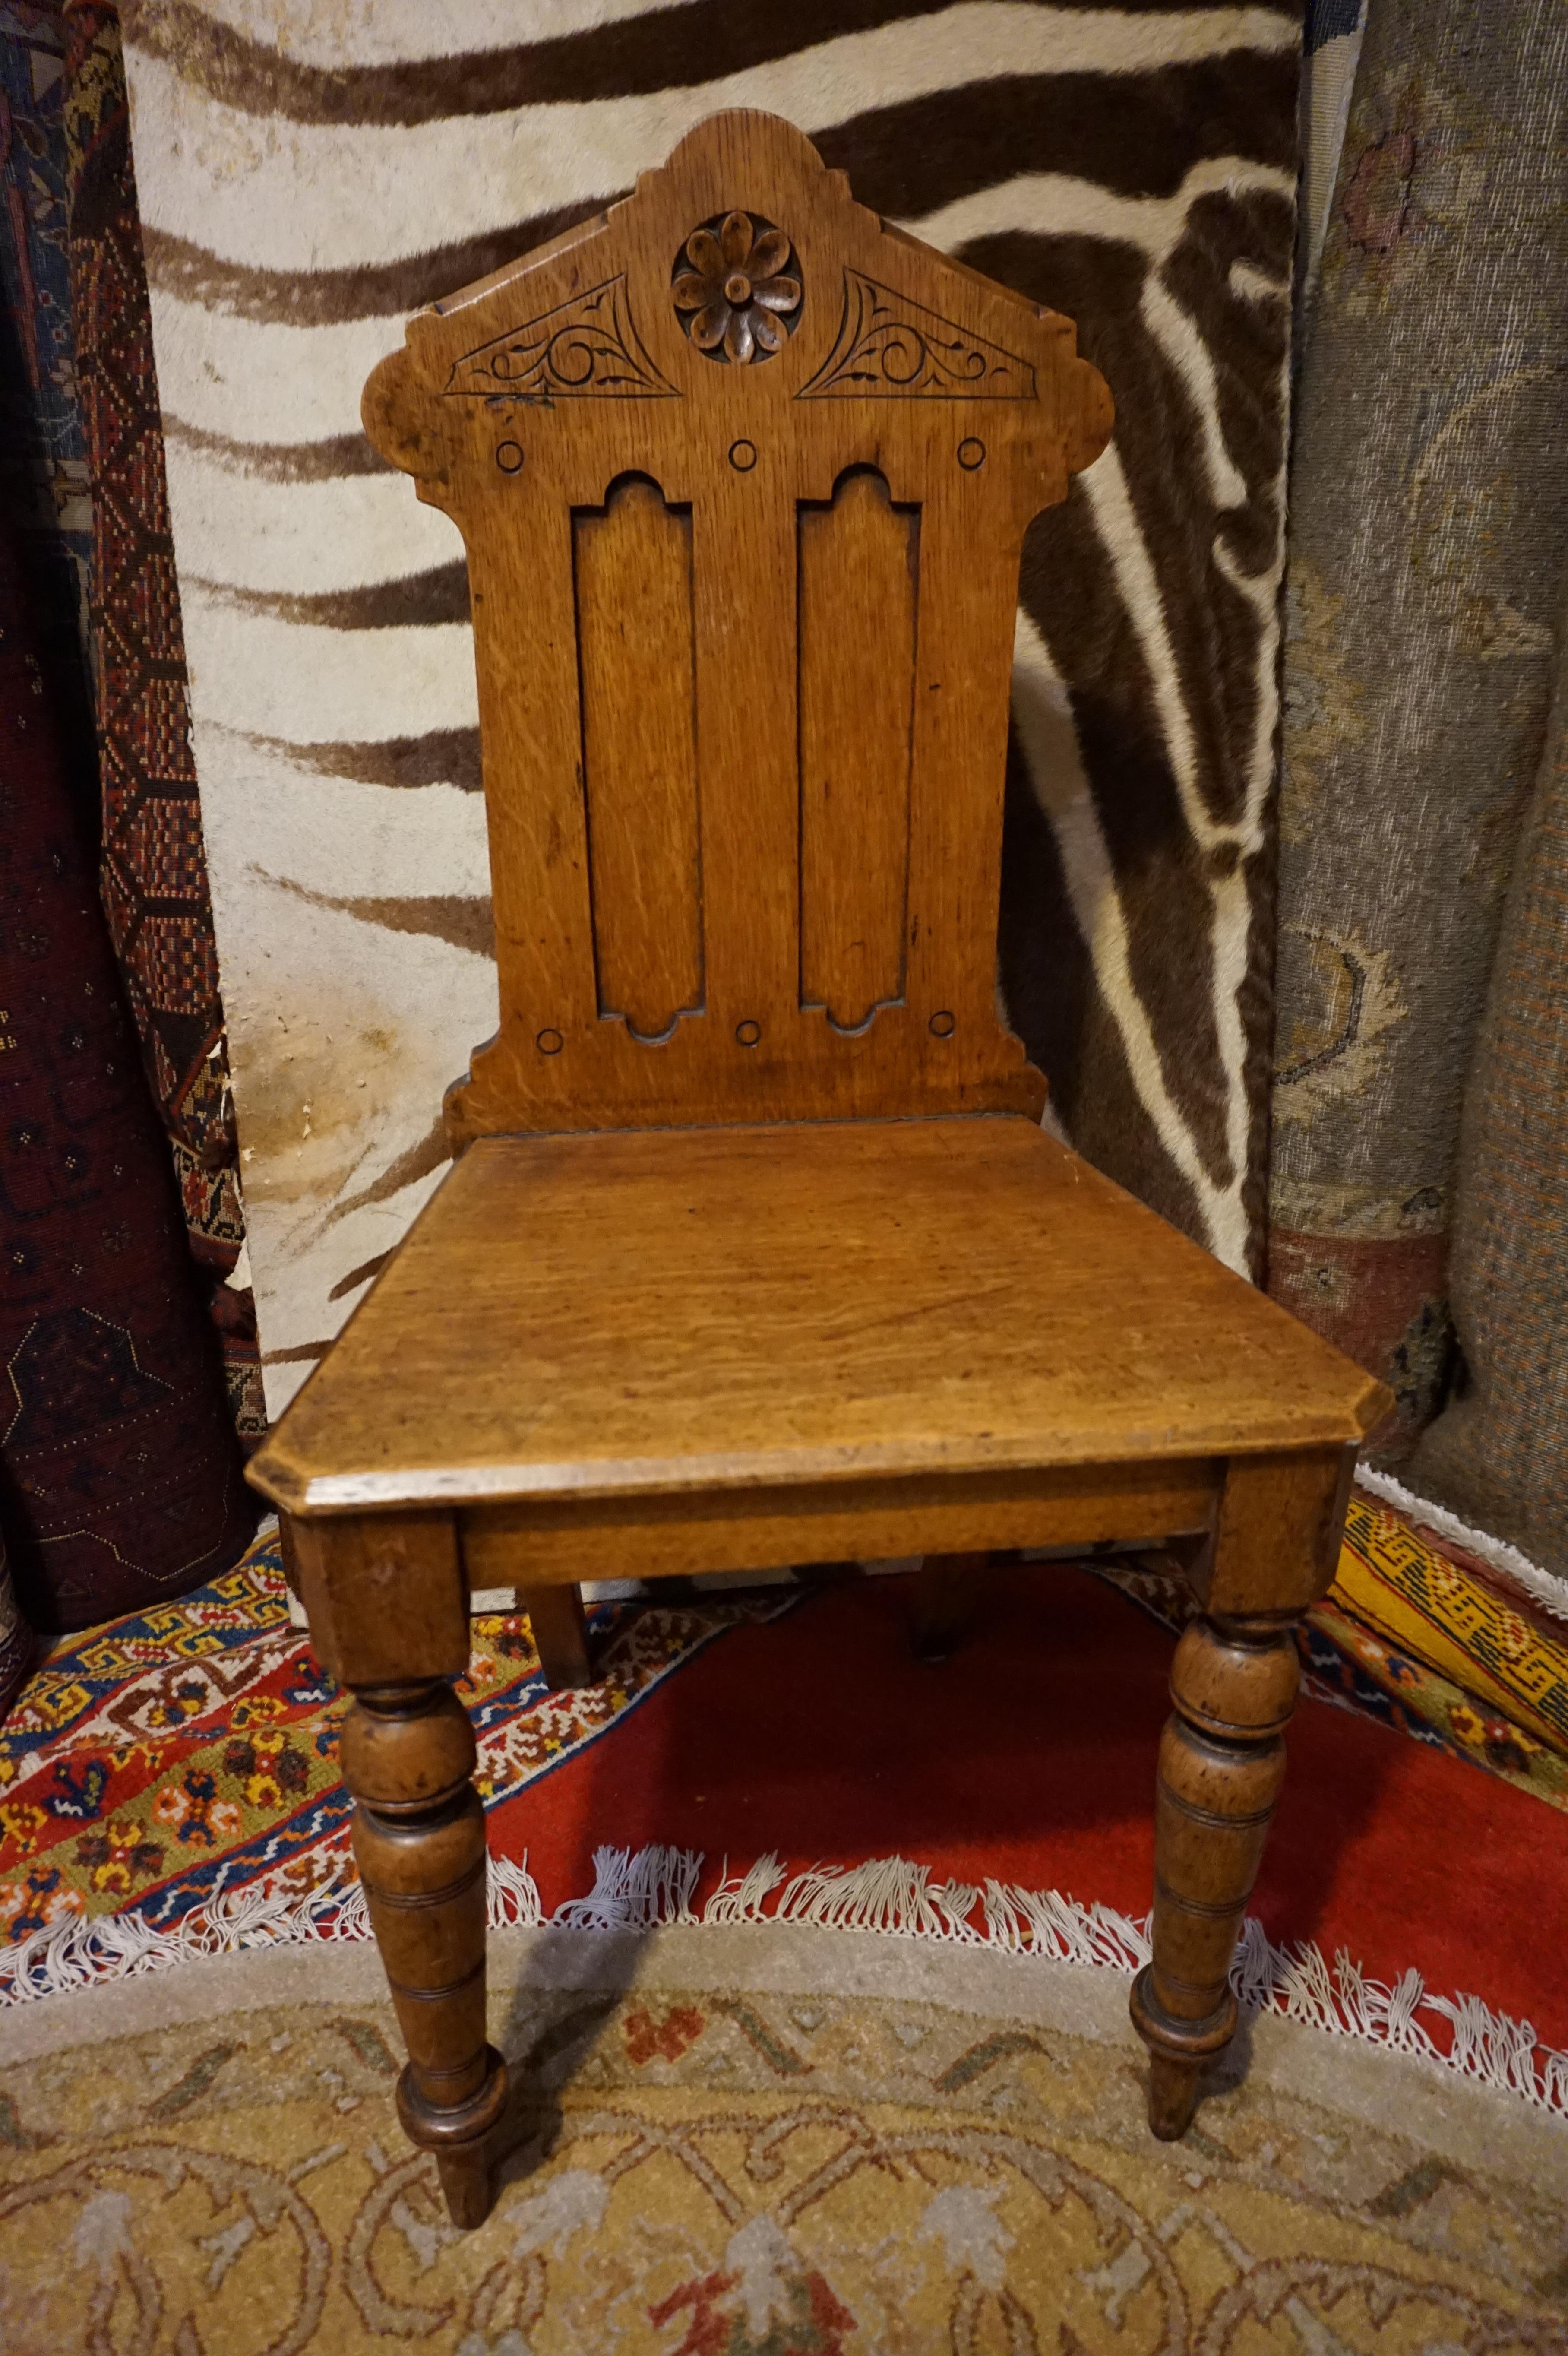 Solid Oak hand carved English Gothic Revival chair in excellent original condition. Sturdy and well proportioned. Skilfully carved with dowel and peg work joinery. Upright posture. Original patina. Exudes character. A singular chair for occasional